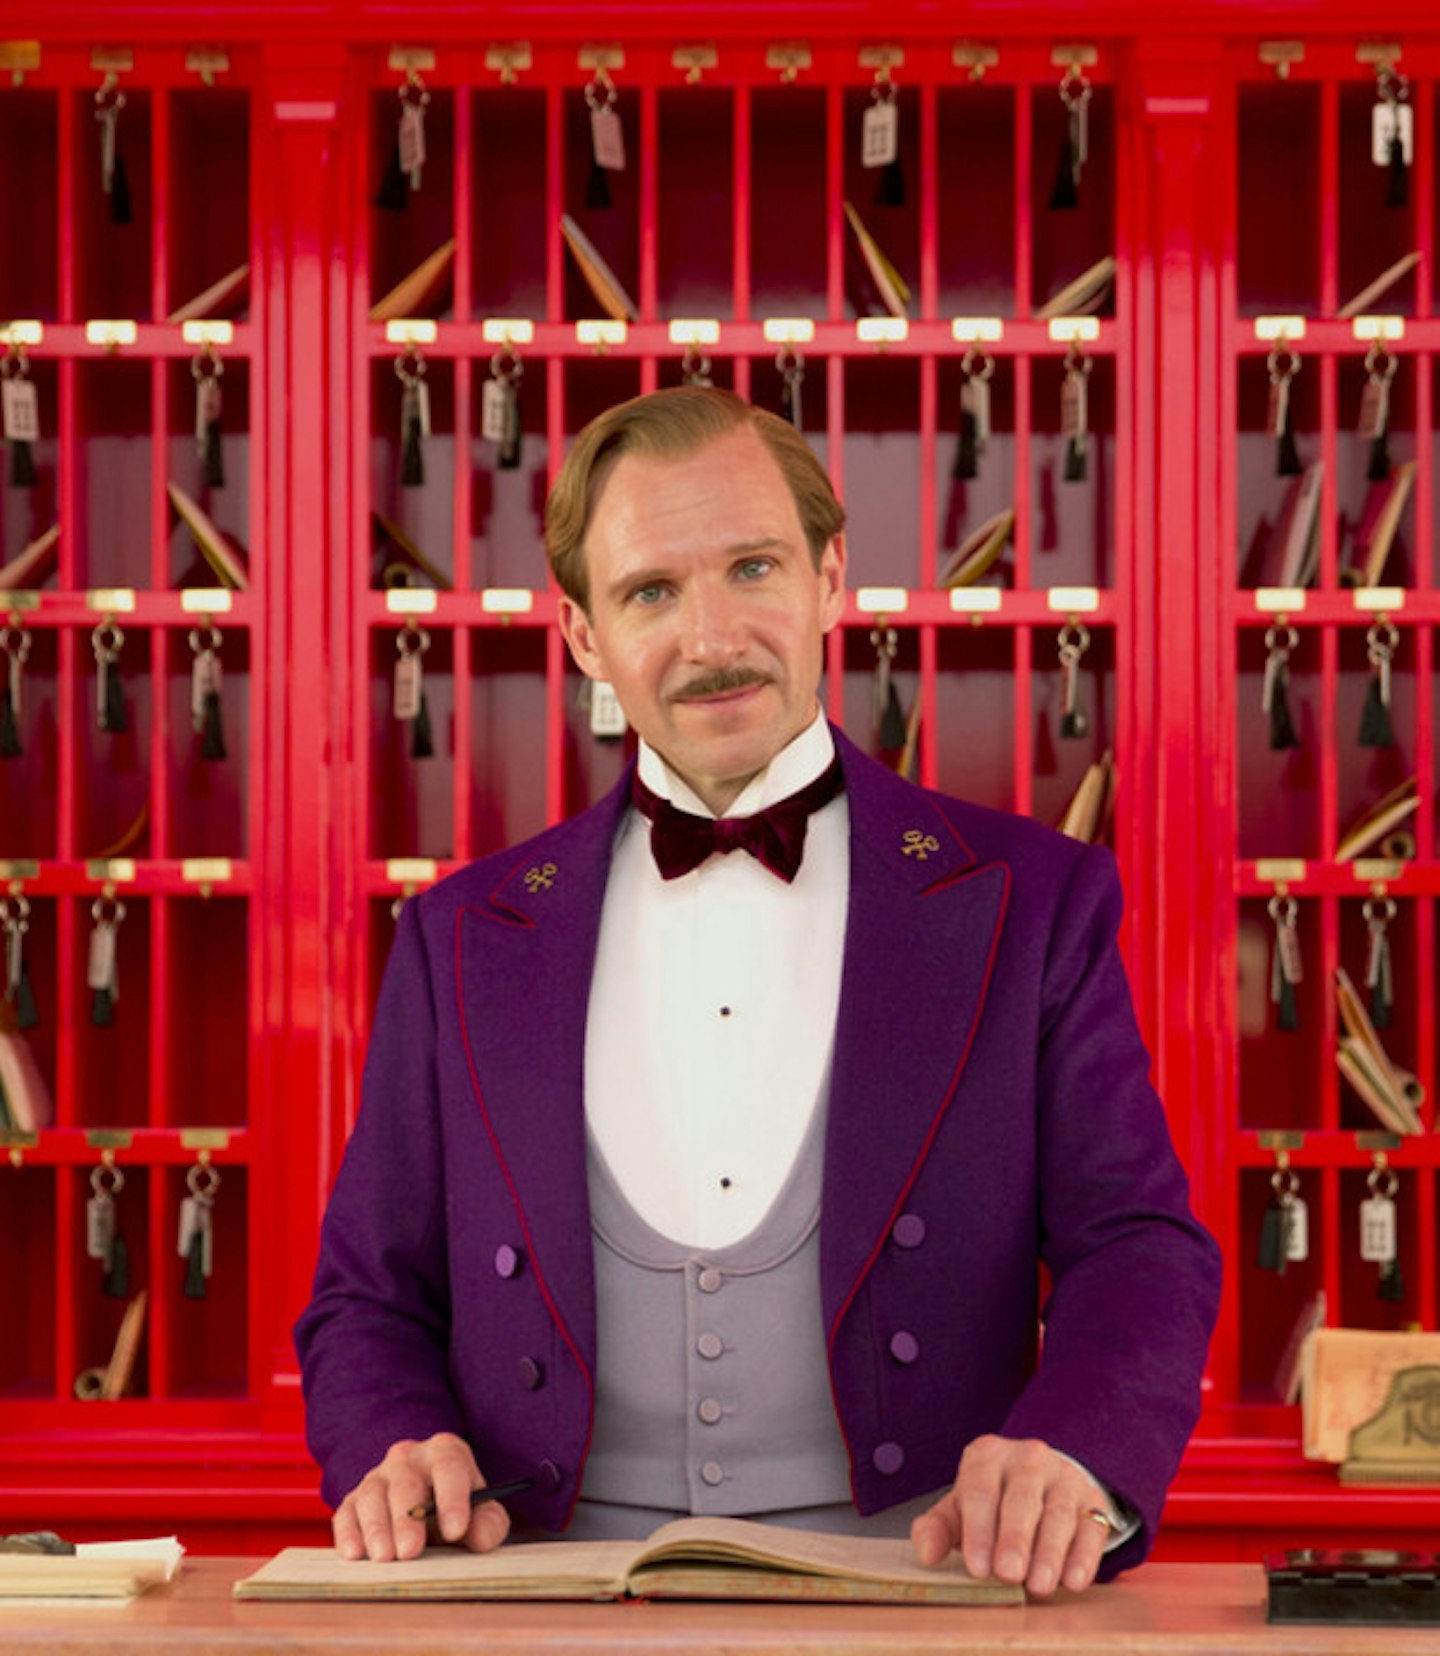 ralph-fiennes-in-GRAND-BUDAPEST-HOTEL